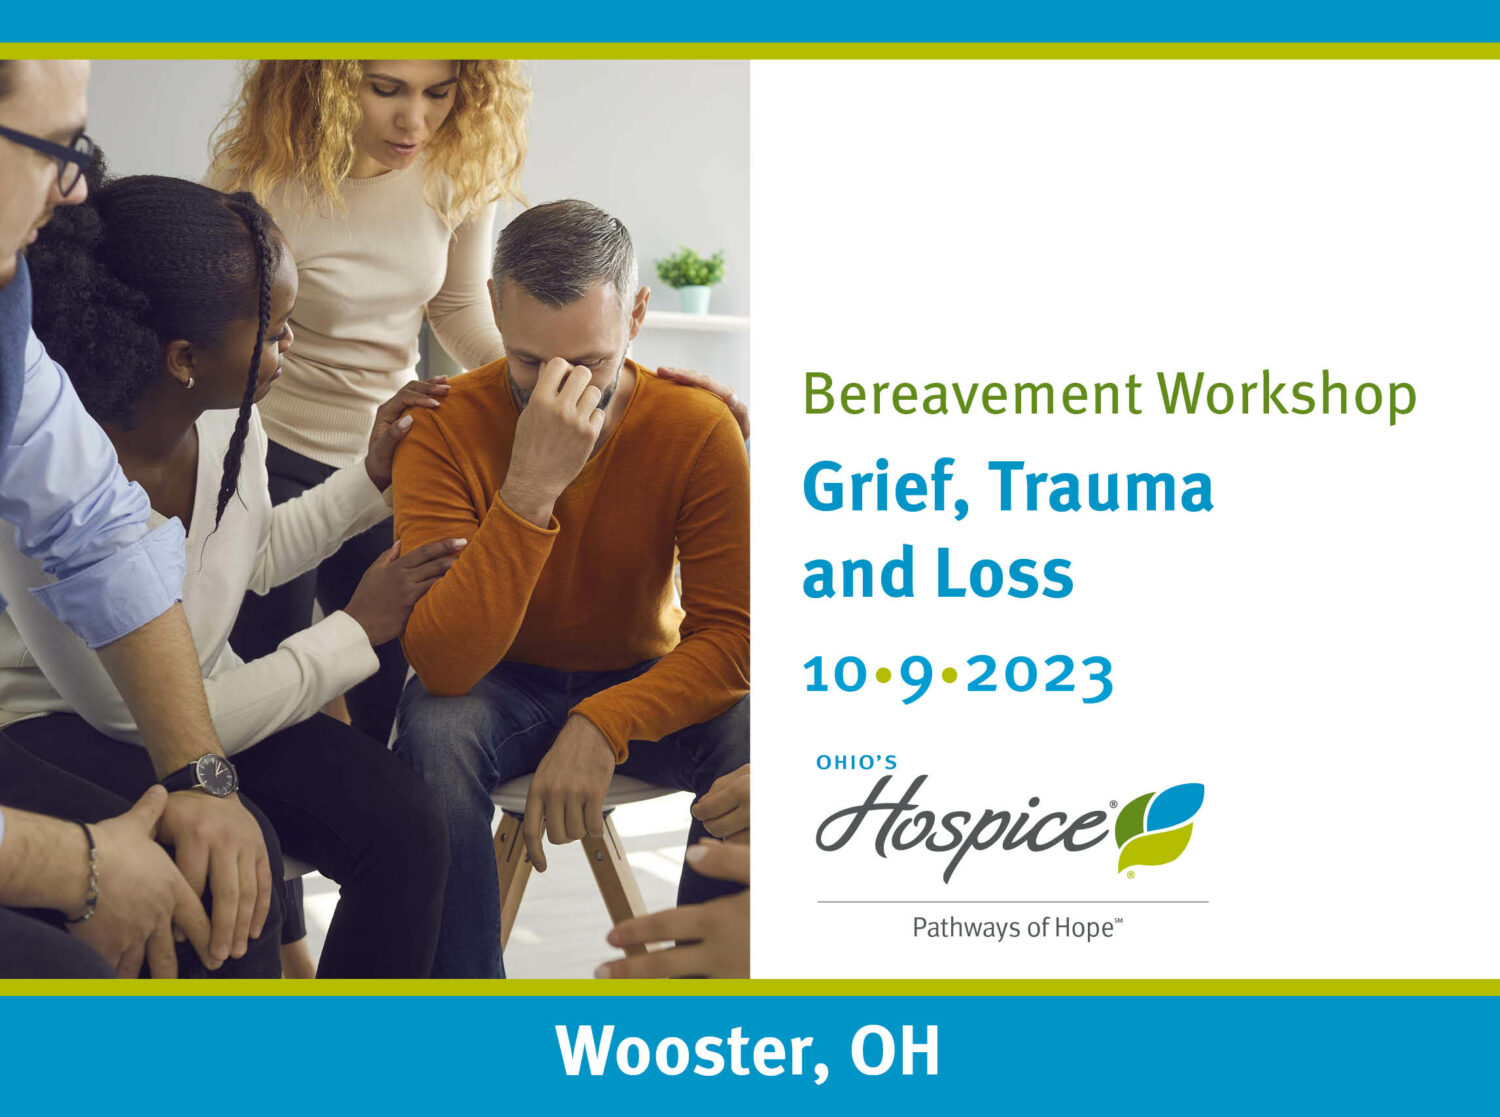 Bereavement Workshop. Grief, Trauma and Loss. 10.9.23. Ohio's Hospice Pathways of Hope.